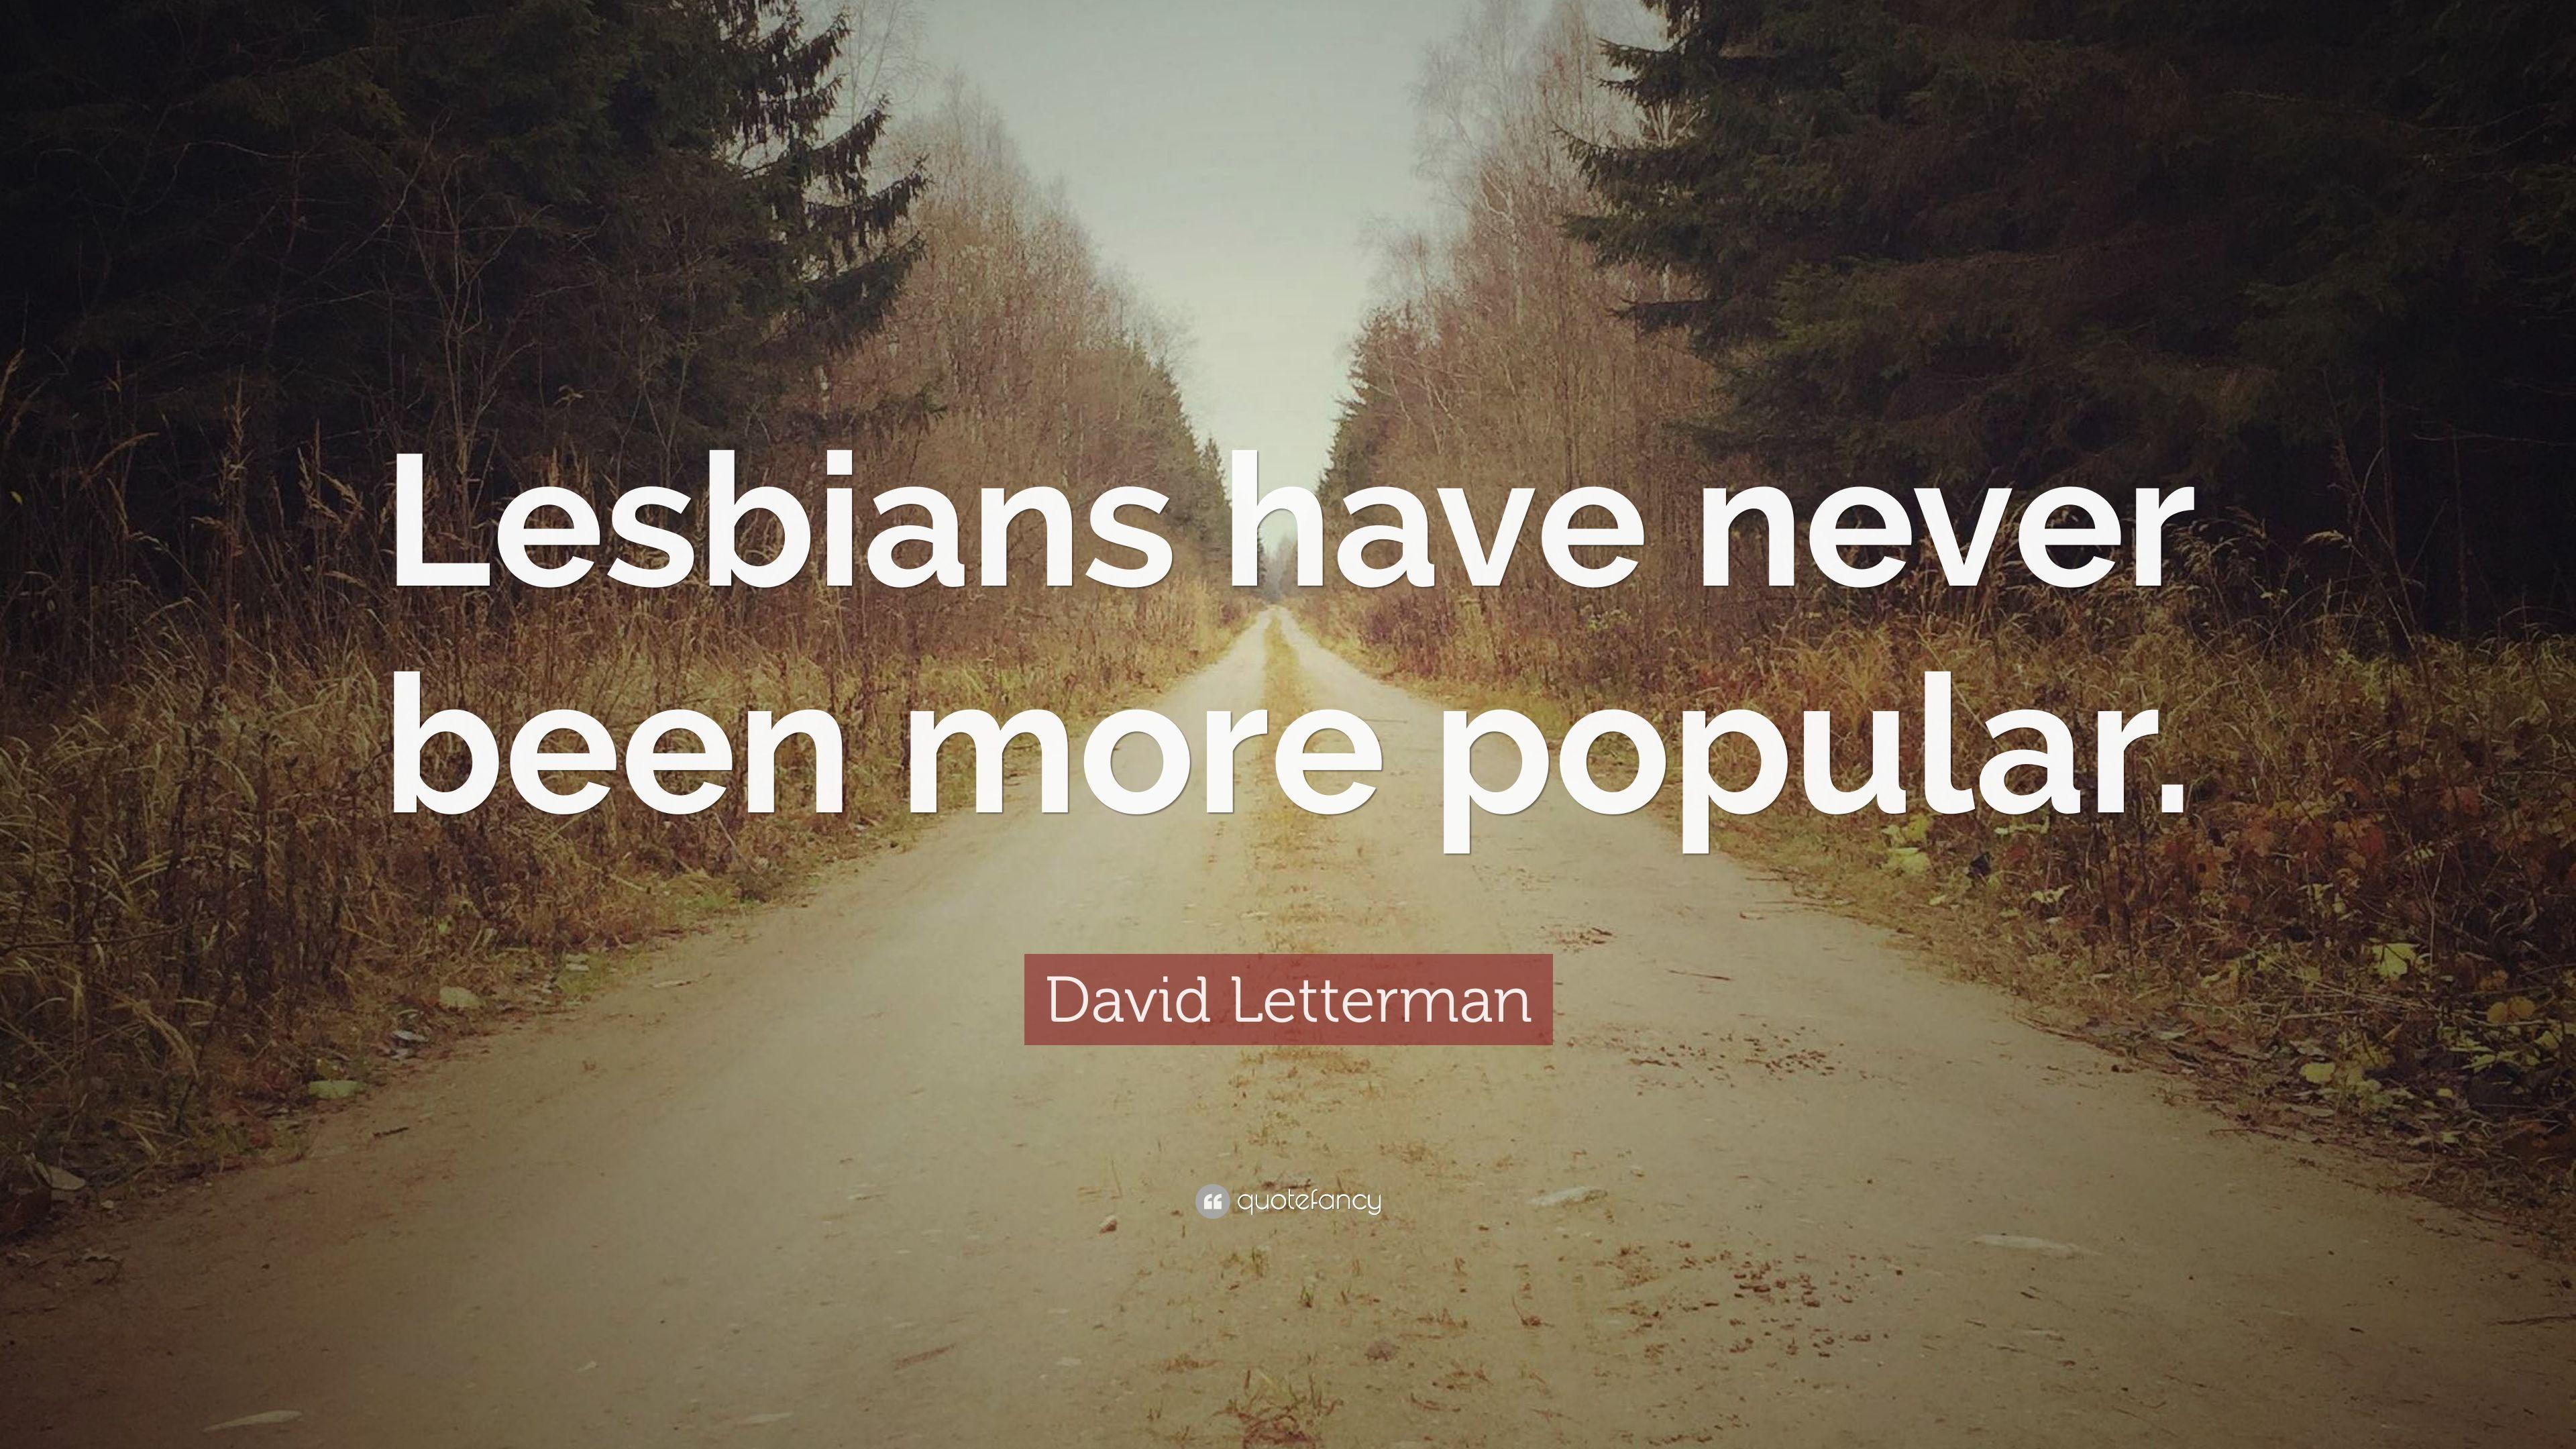 David Letterman Quote: “Lesbians have never been more popular.” 5